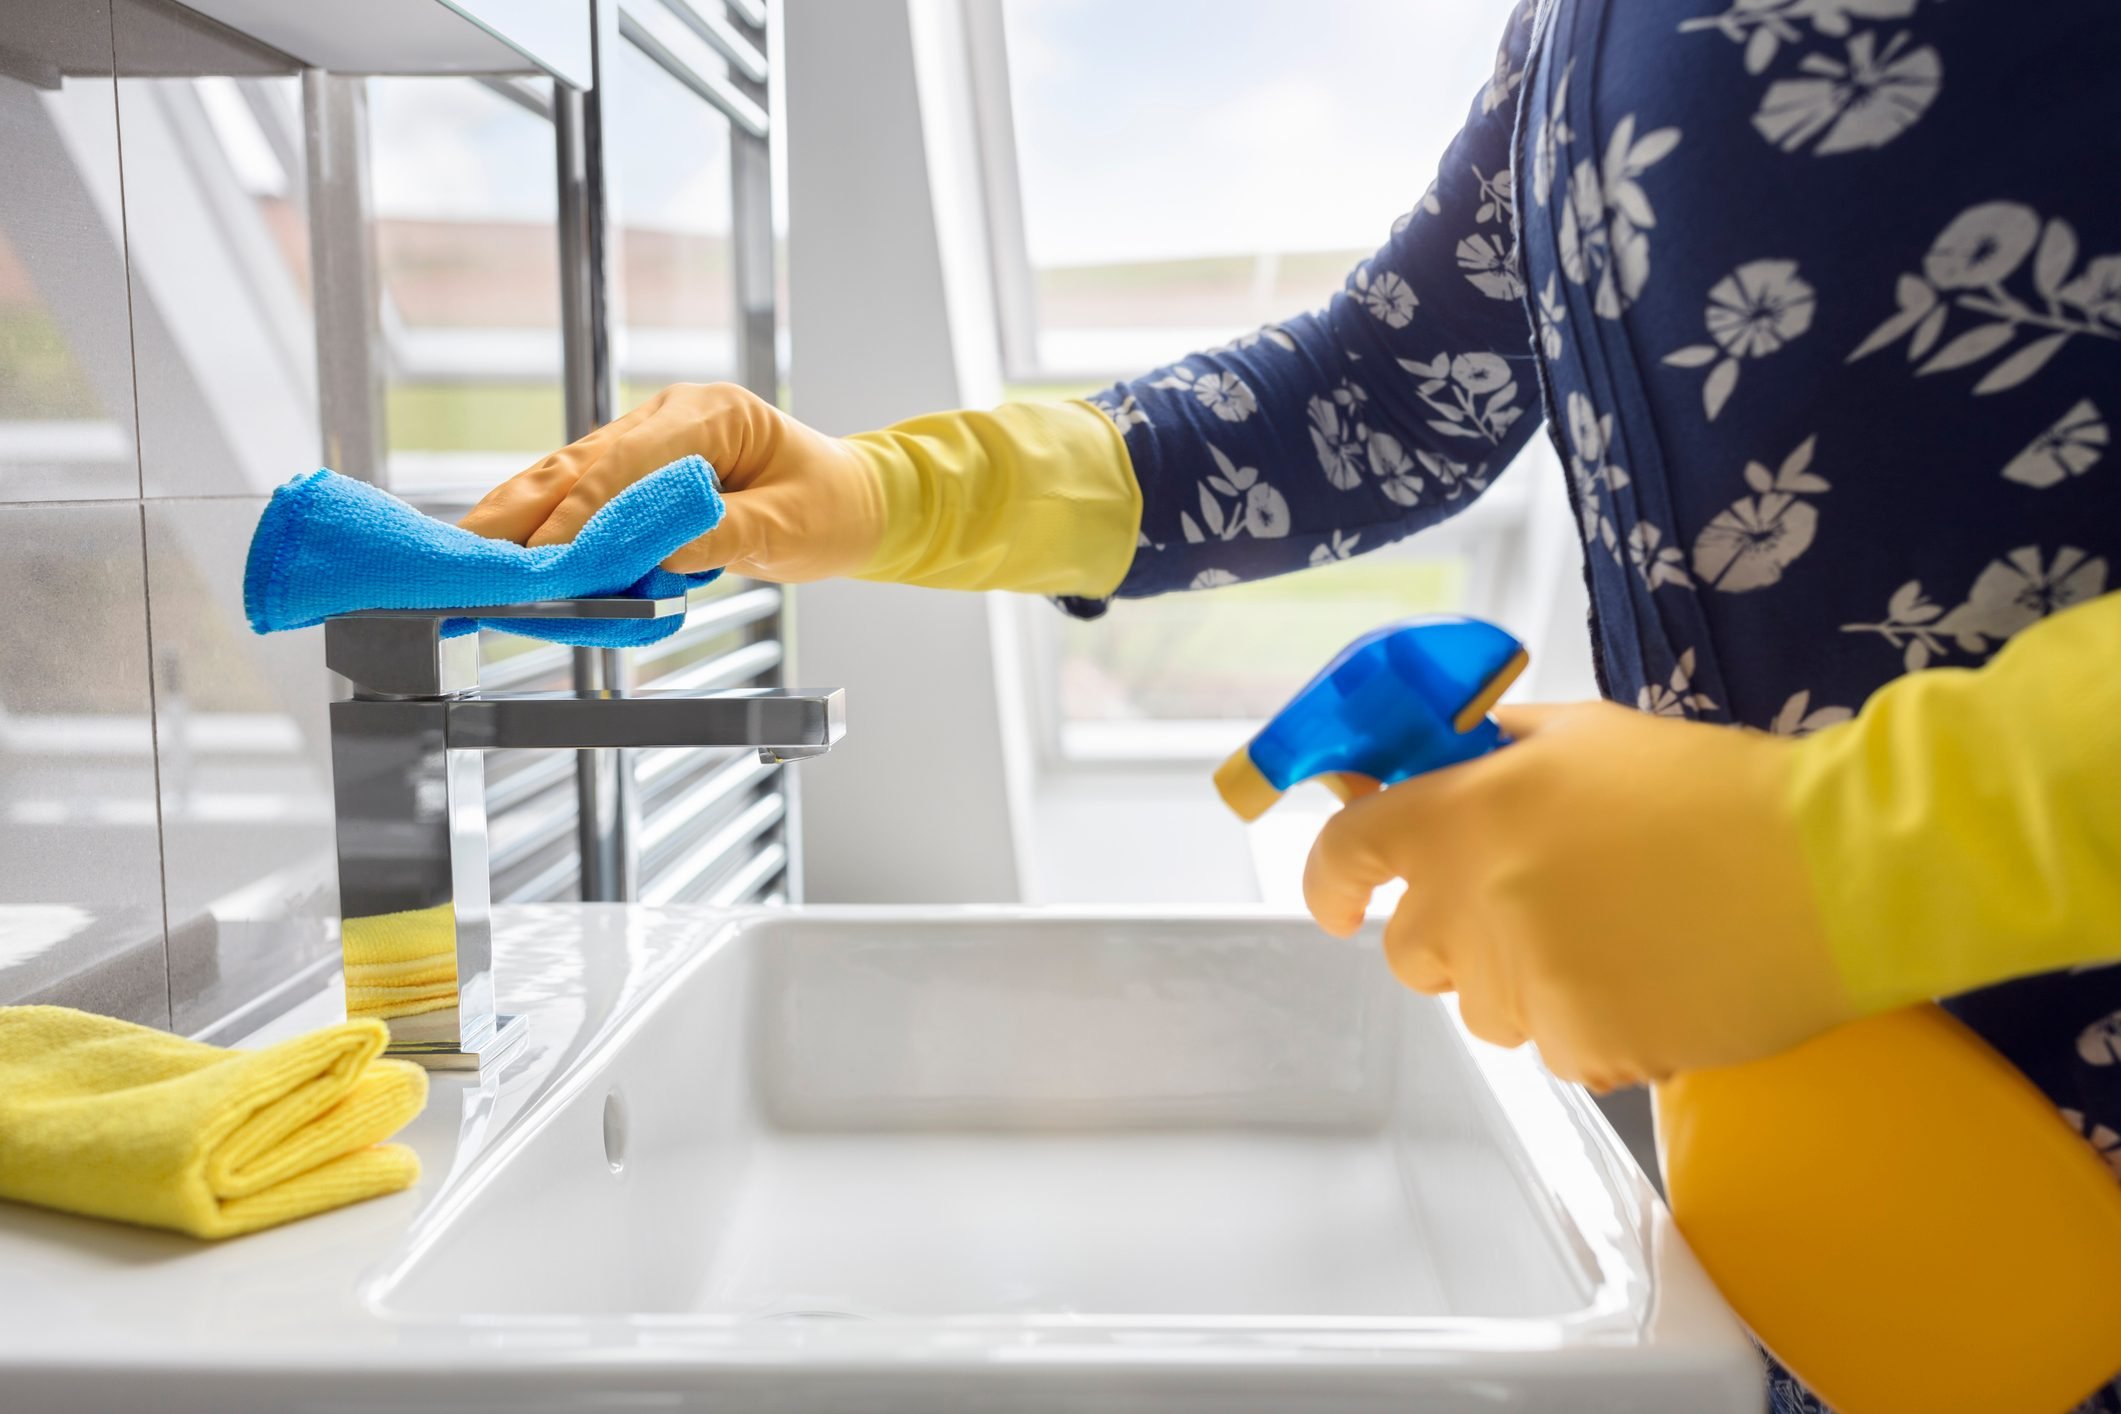 How to Clean a Bathroom: Your Easy Bathroom-Cleaning Checklist